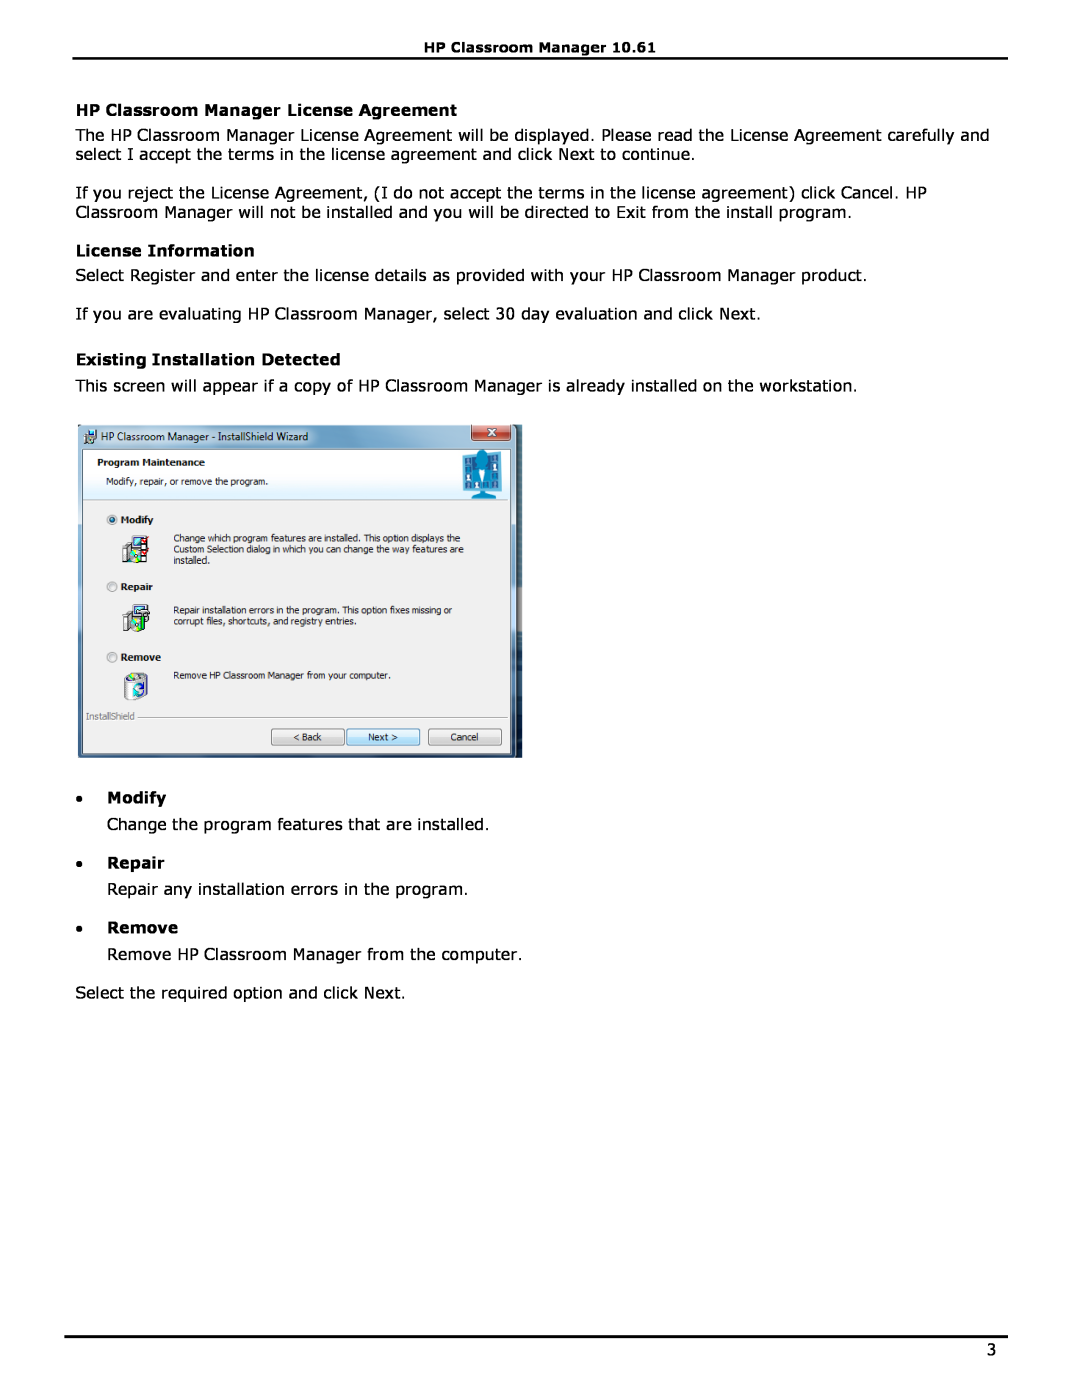 HP HP Classroom Manager License Agreement, License Information, Existing Installation Detected, ∙ Modify, ∙ Repair 